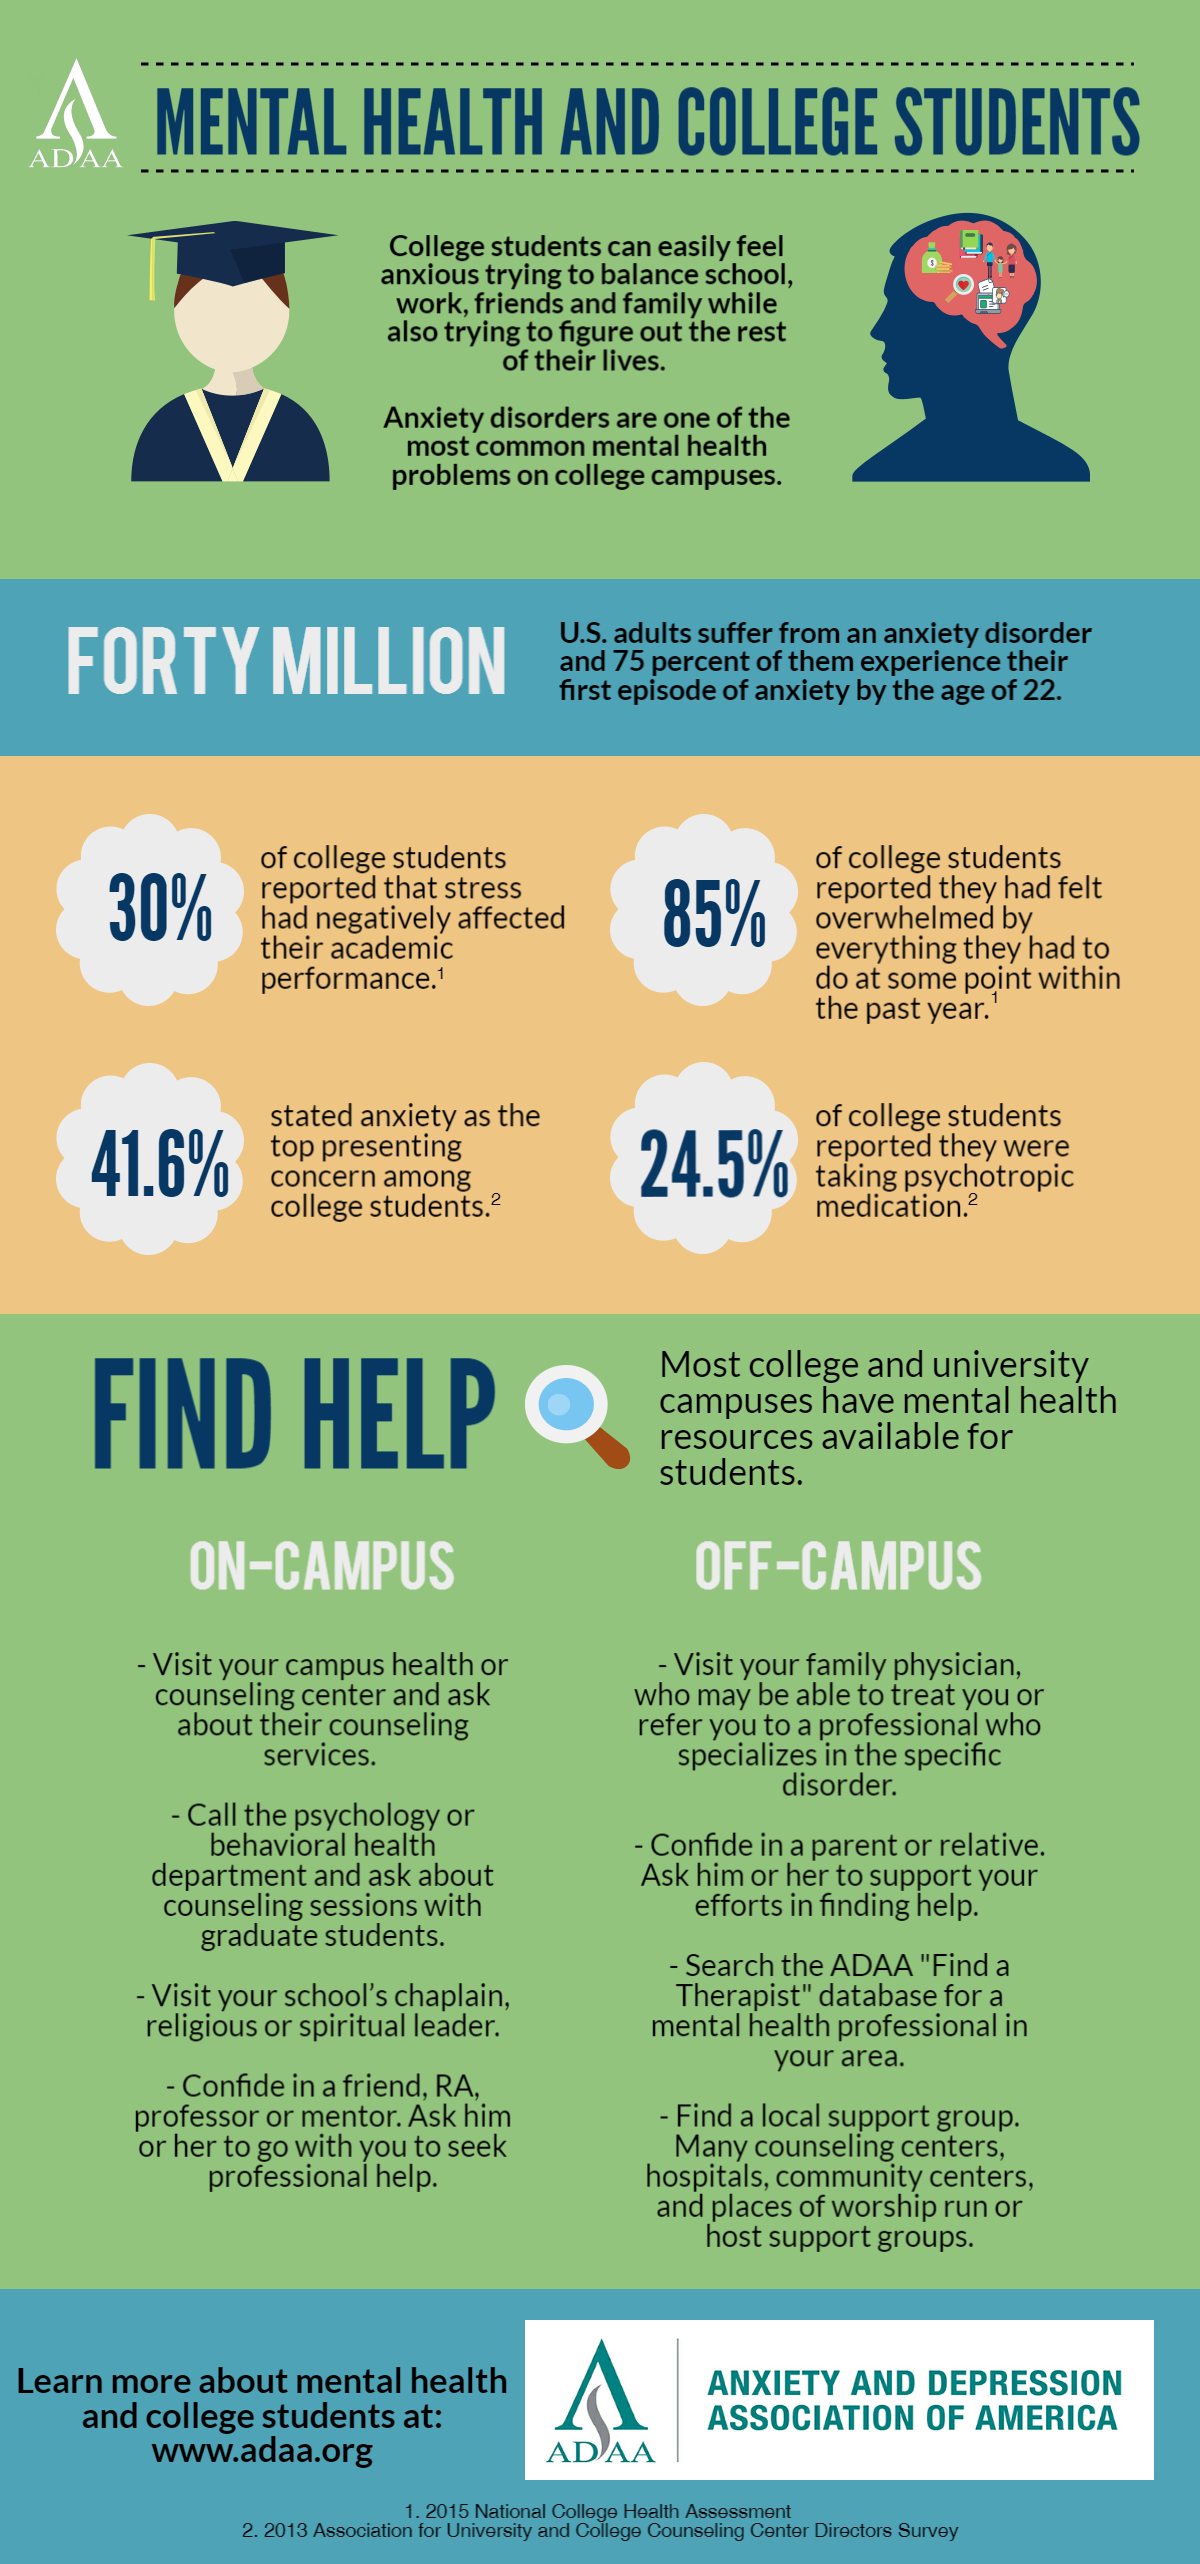 how does depression affect college students